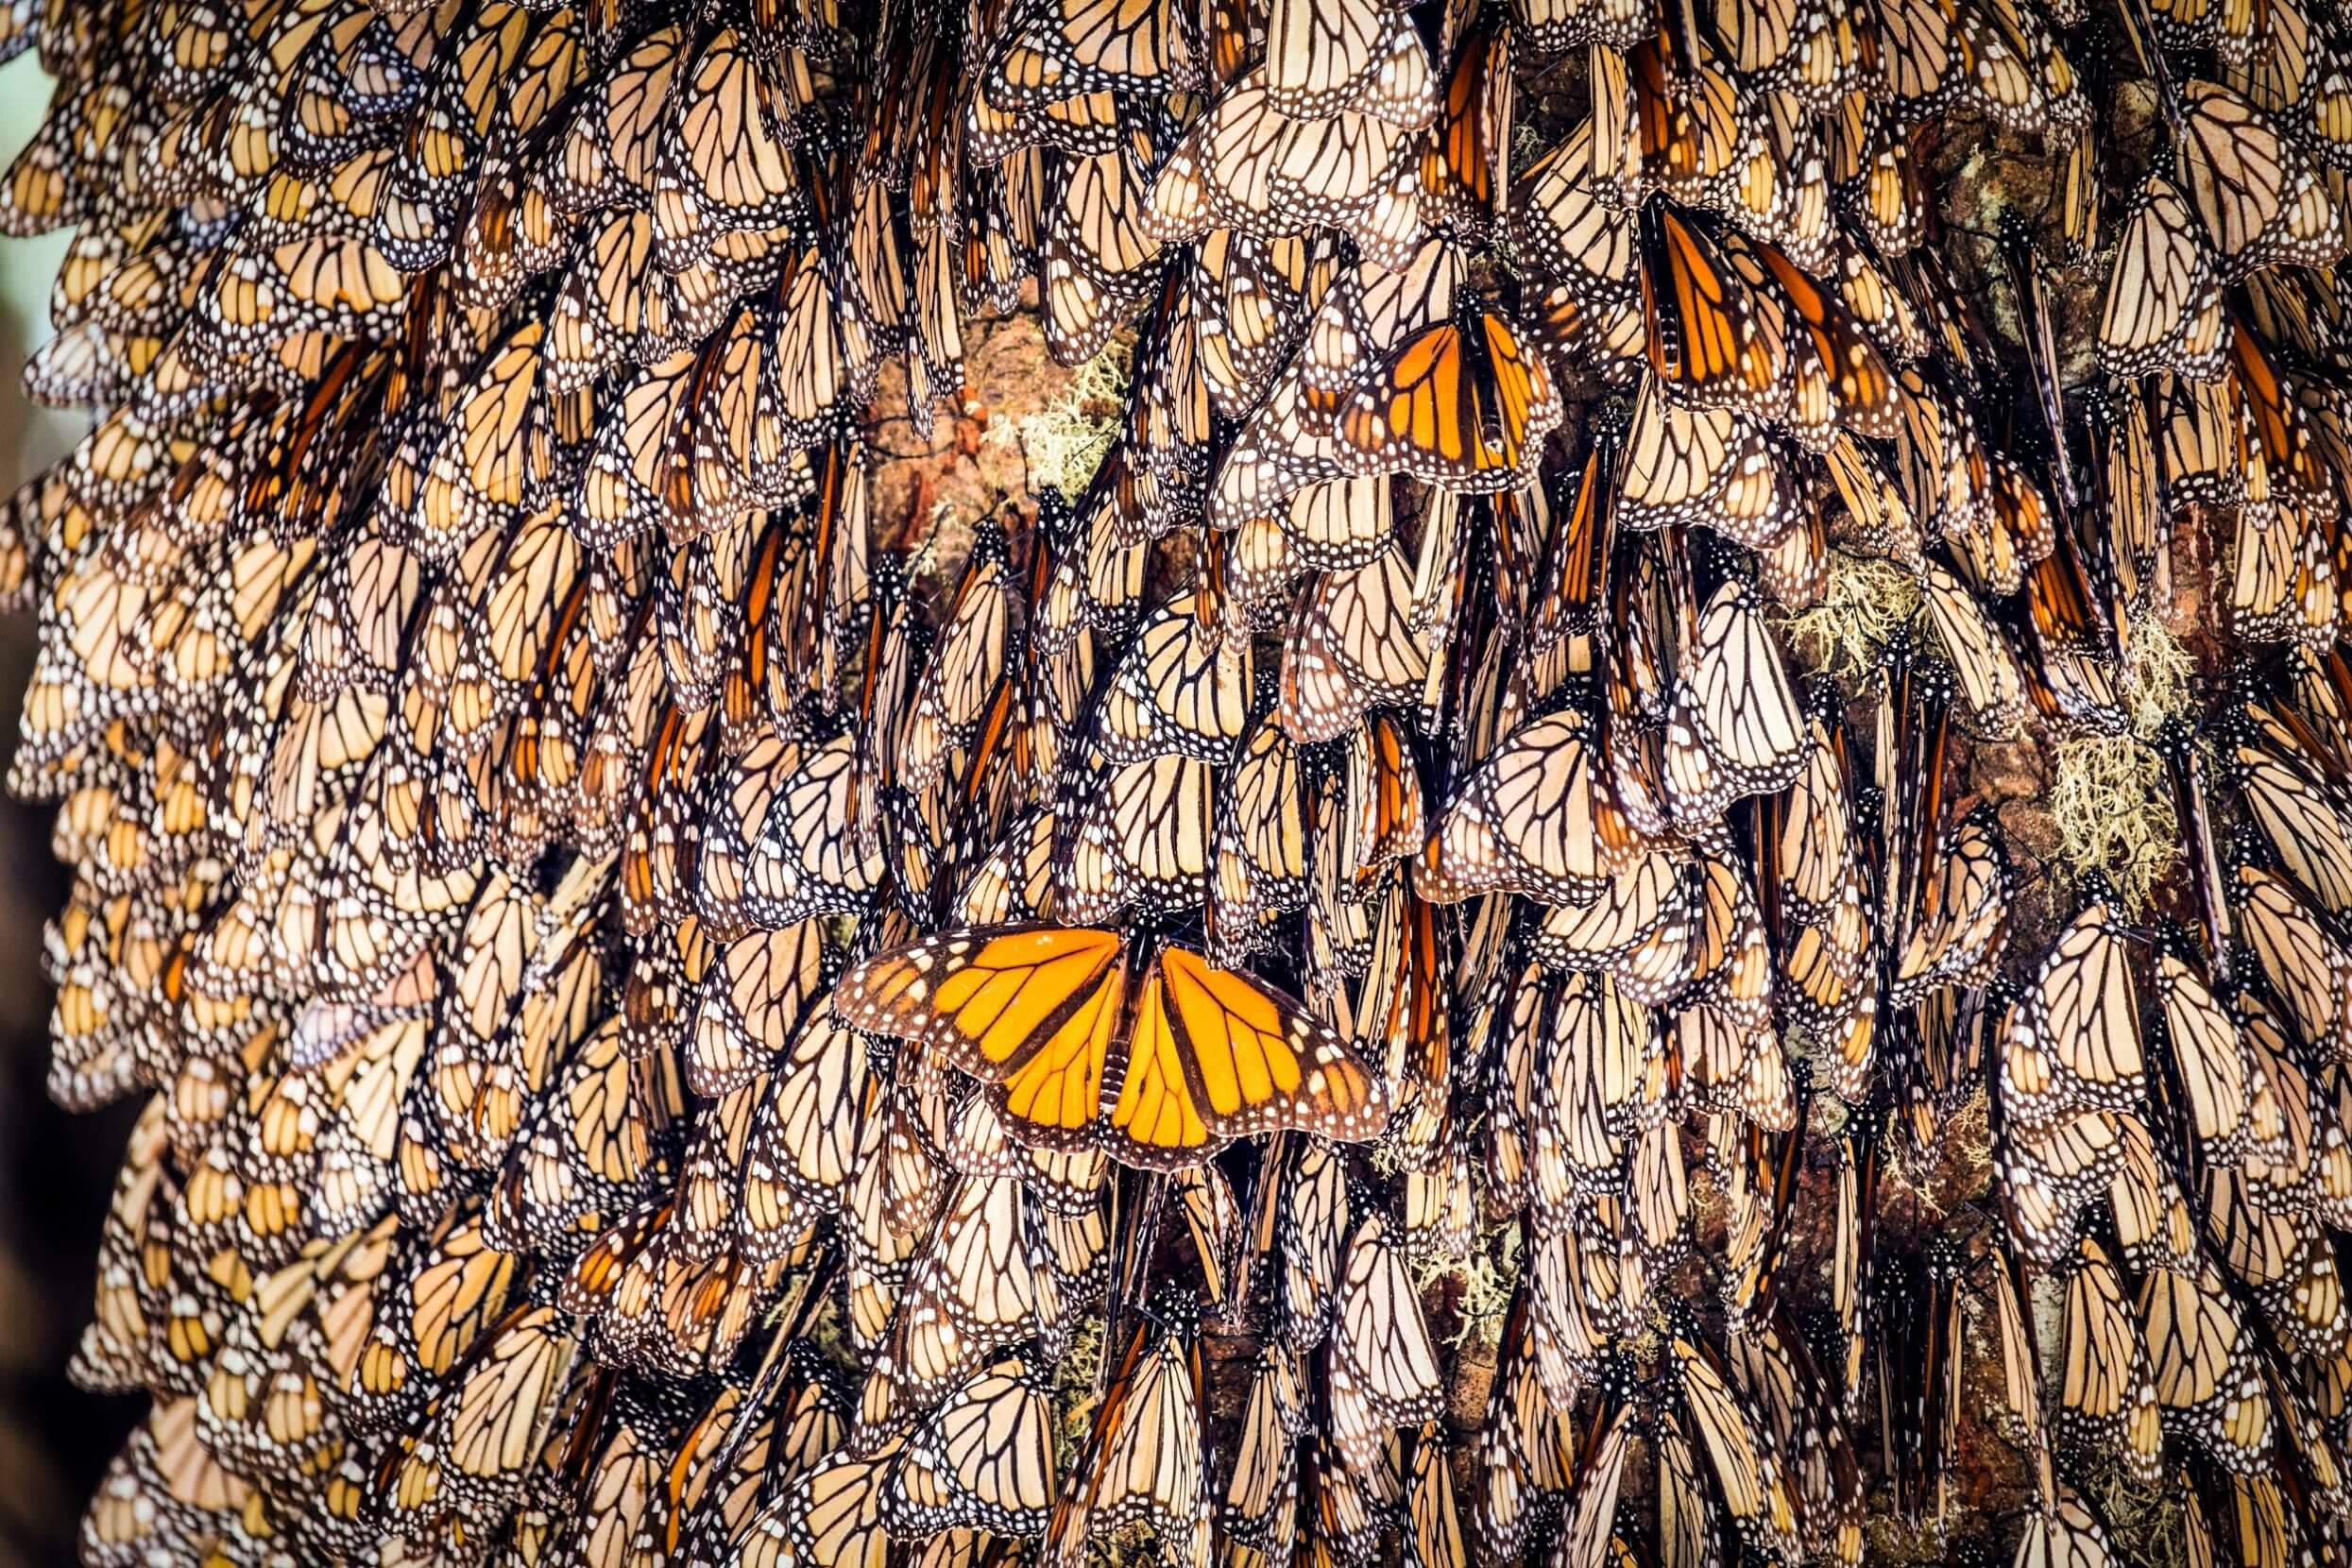 MKD3MJ Monarch butterfly (Danaus plexippus), In wintering from November to March in oyamel pine forests (Abies religiosa), El Rosario, Reserve of the Biosfera Monarca, Angangueo, State of Michoacan, Mexico